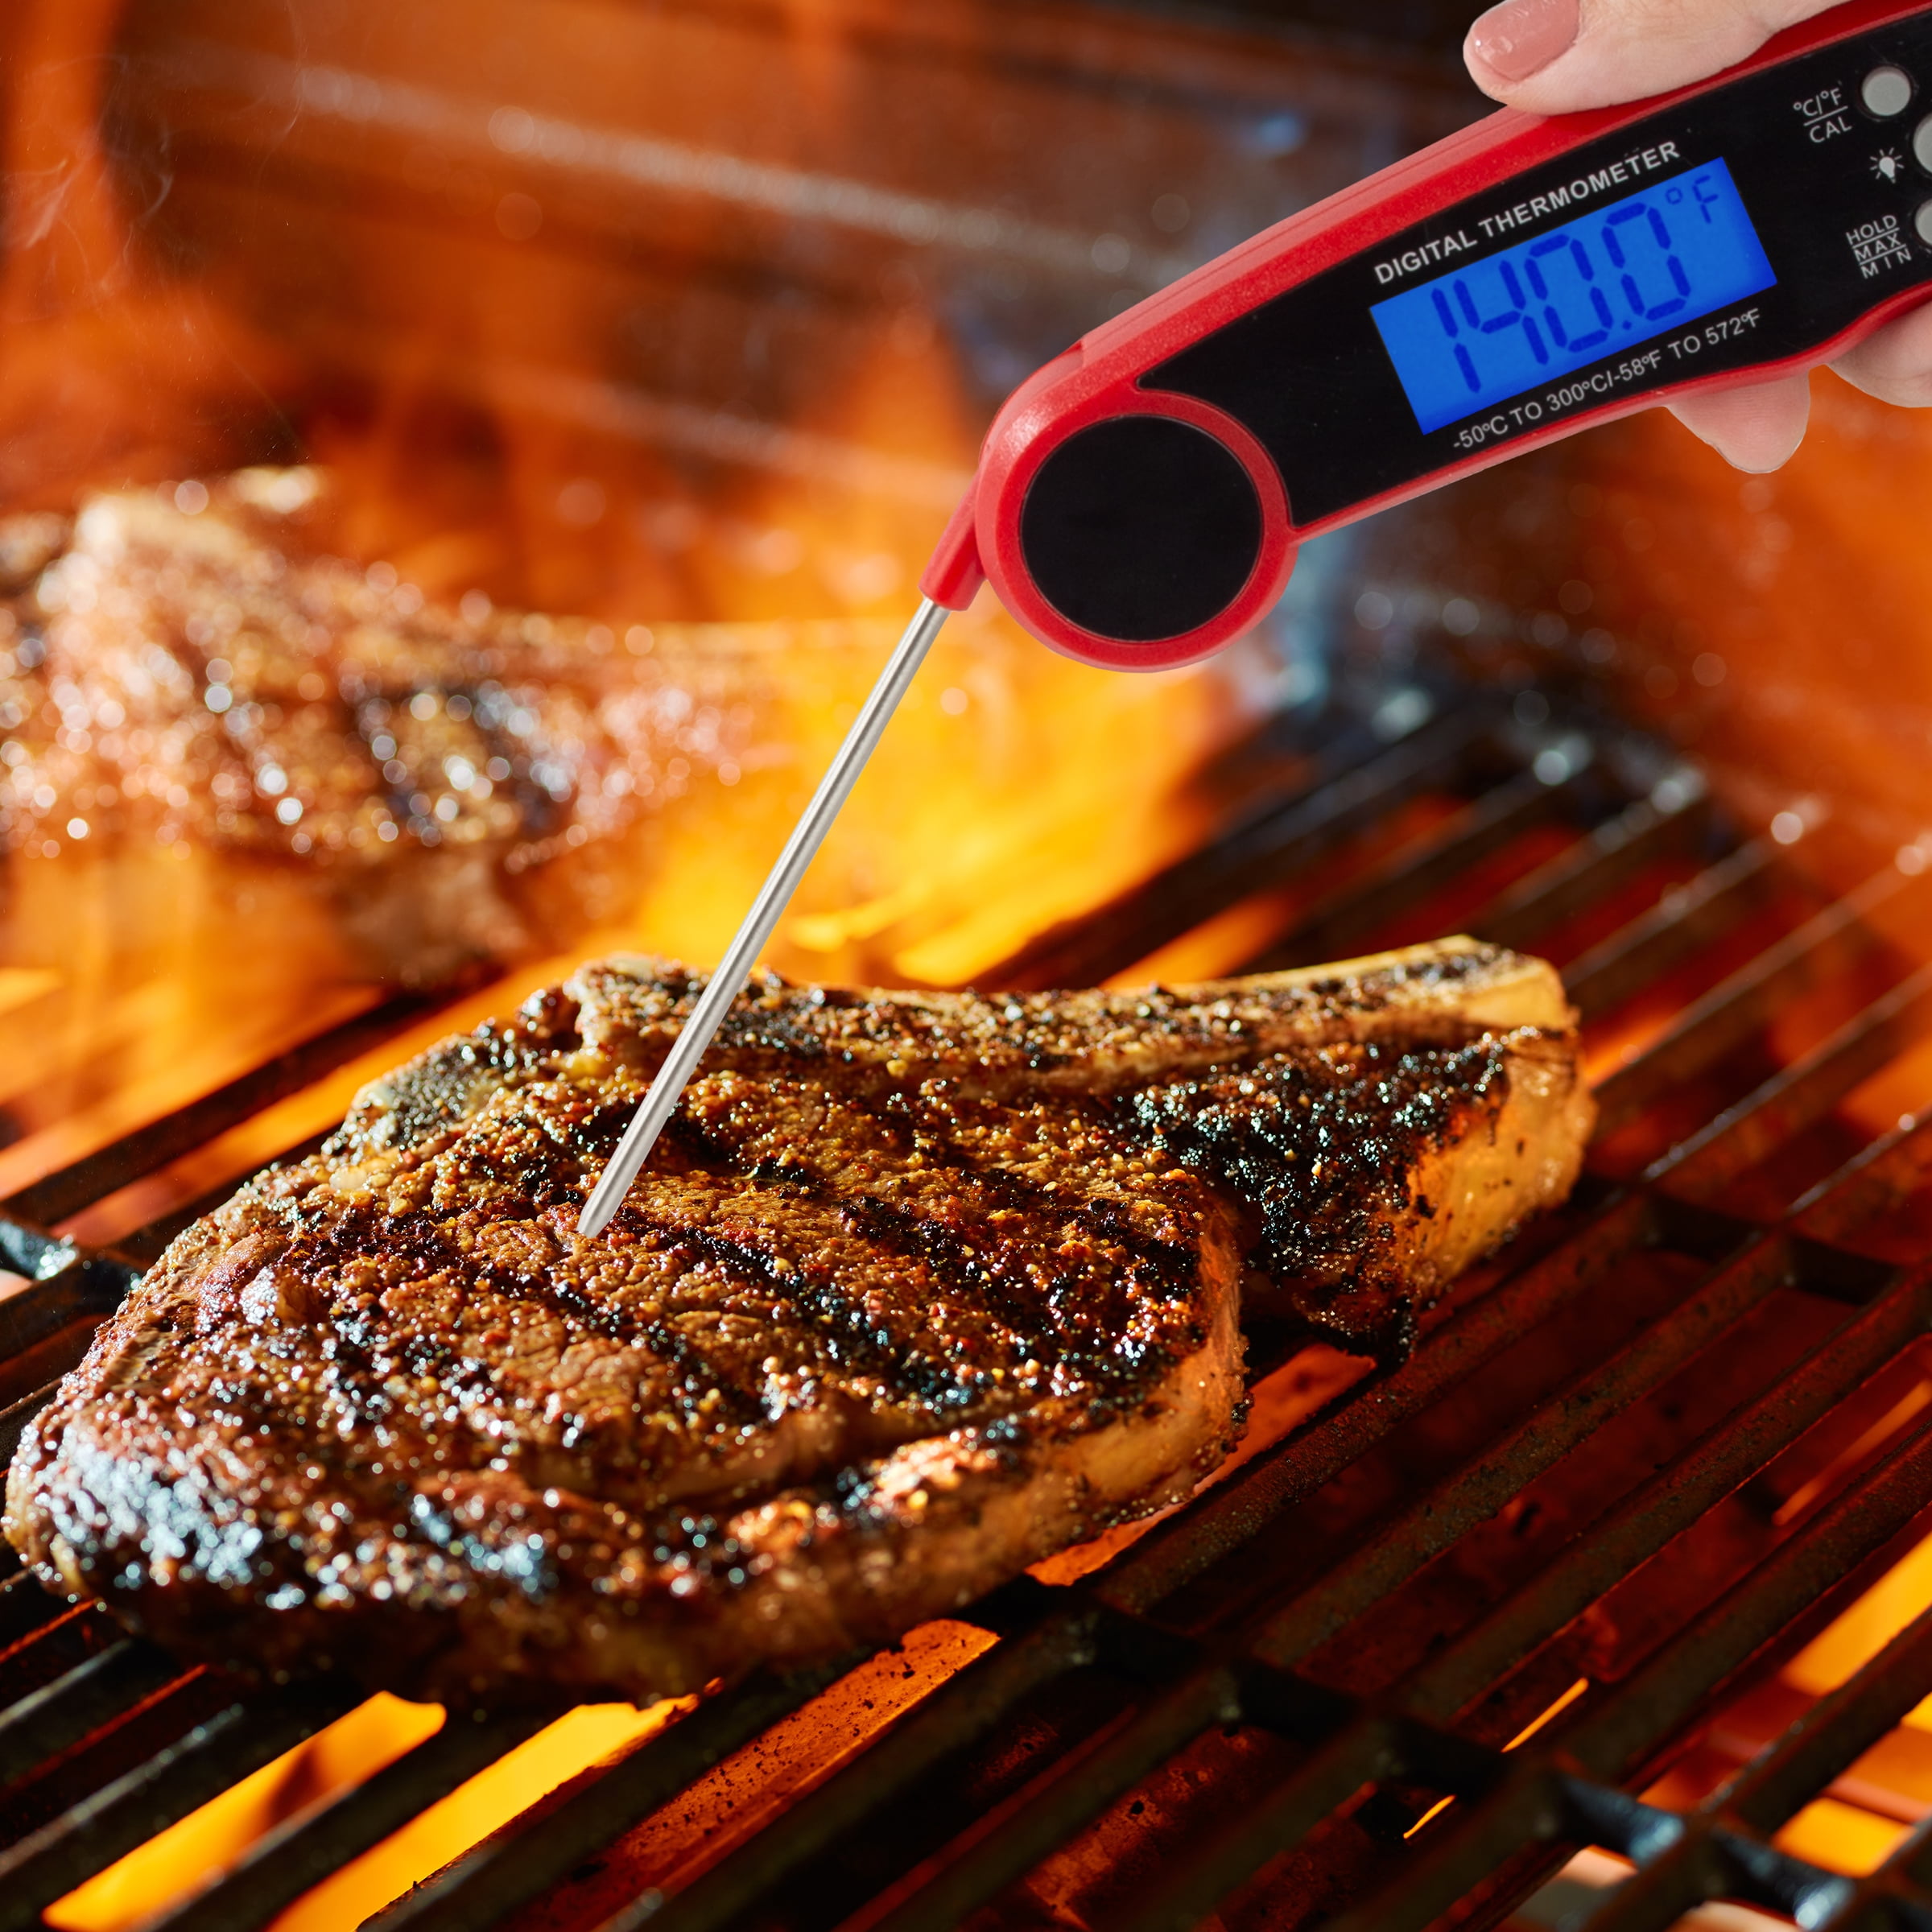 HOME-COMPLETE Red Instant Read Digital Thermometer with Water-Resistant  Feature KIT1125 - The Home Depot